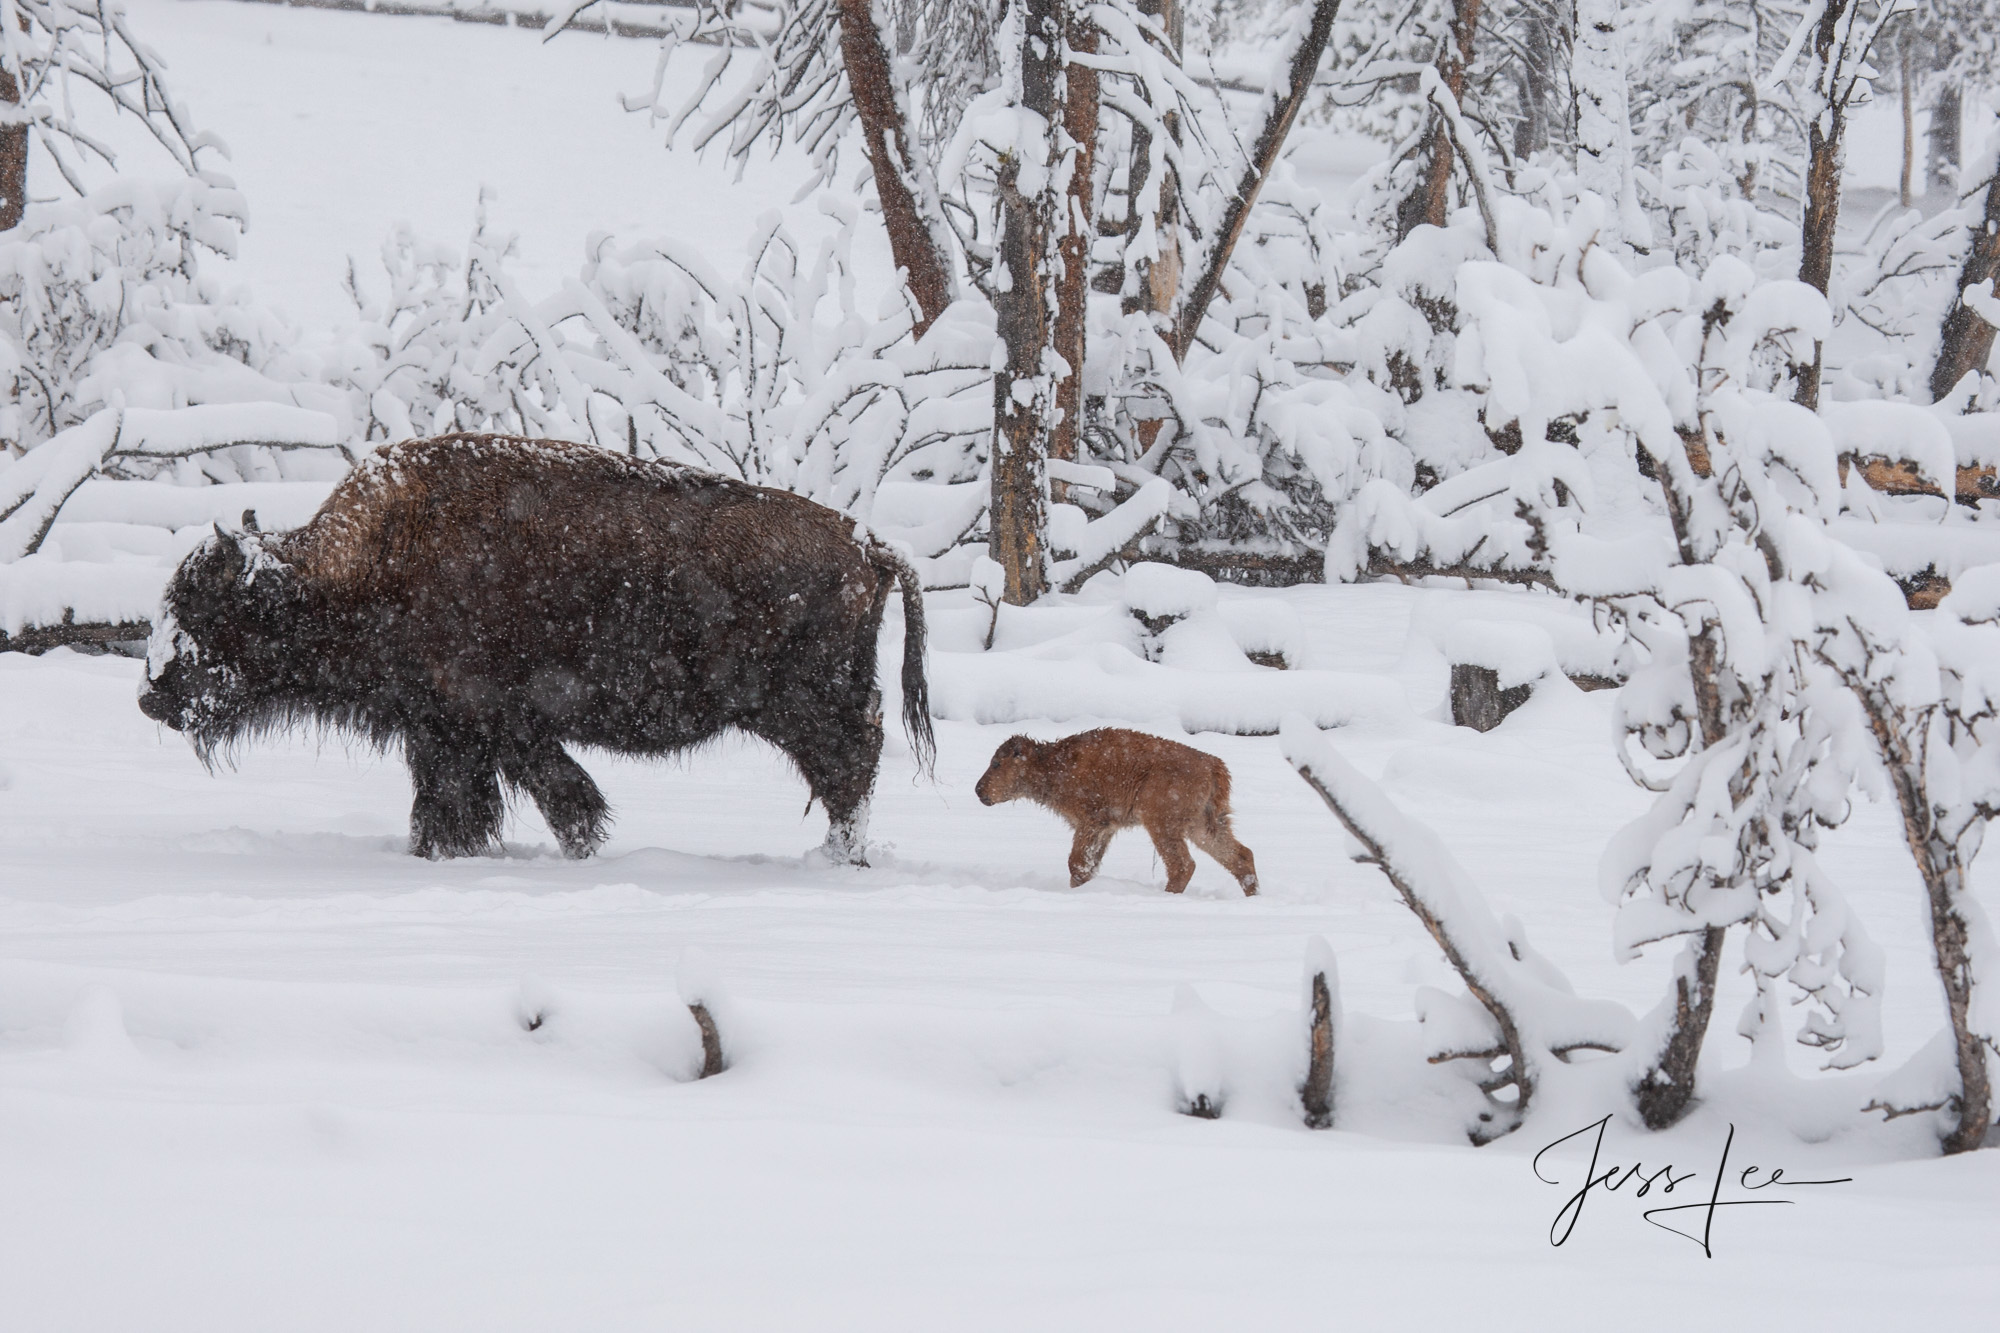 Yellowstone Bison or American Buffalo.. A Limited Edition of 800 Prints. These Spring Calif Bison fine art wildlife photographs...